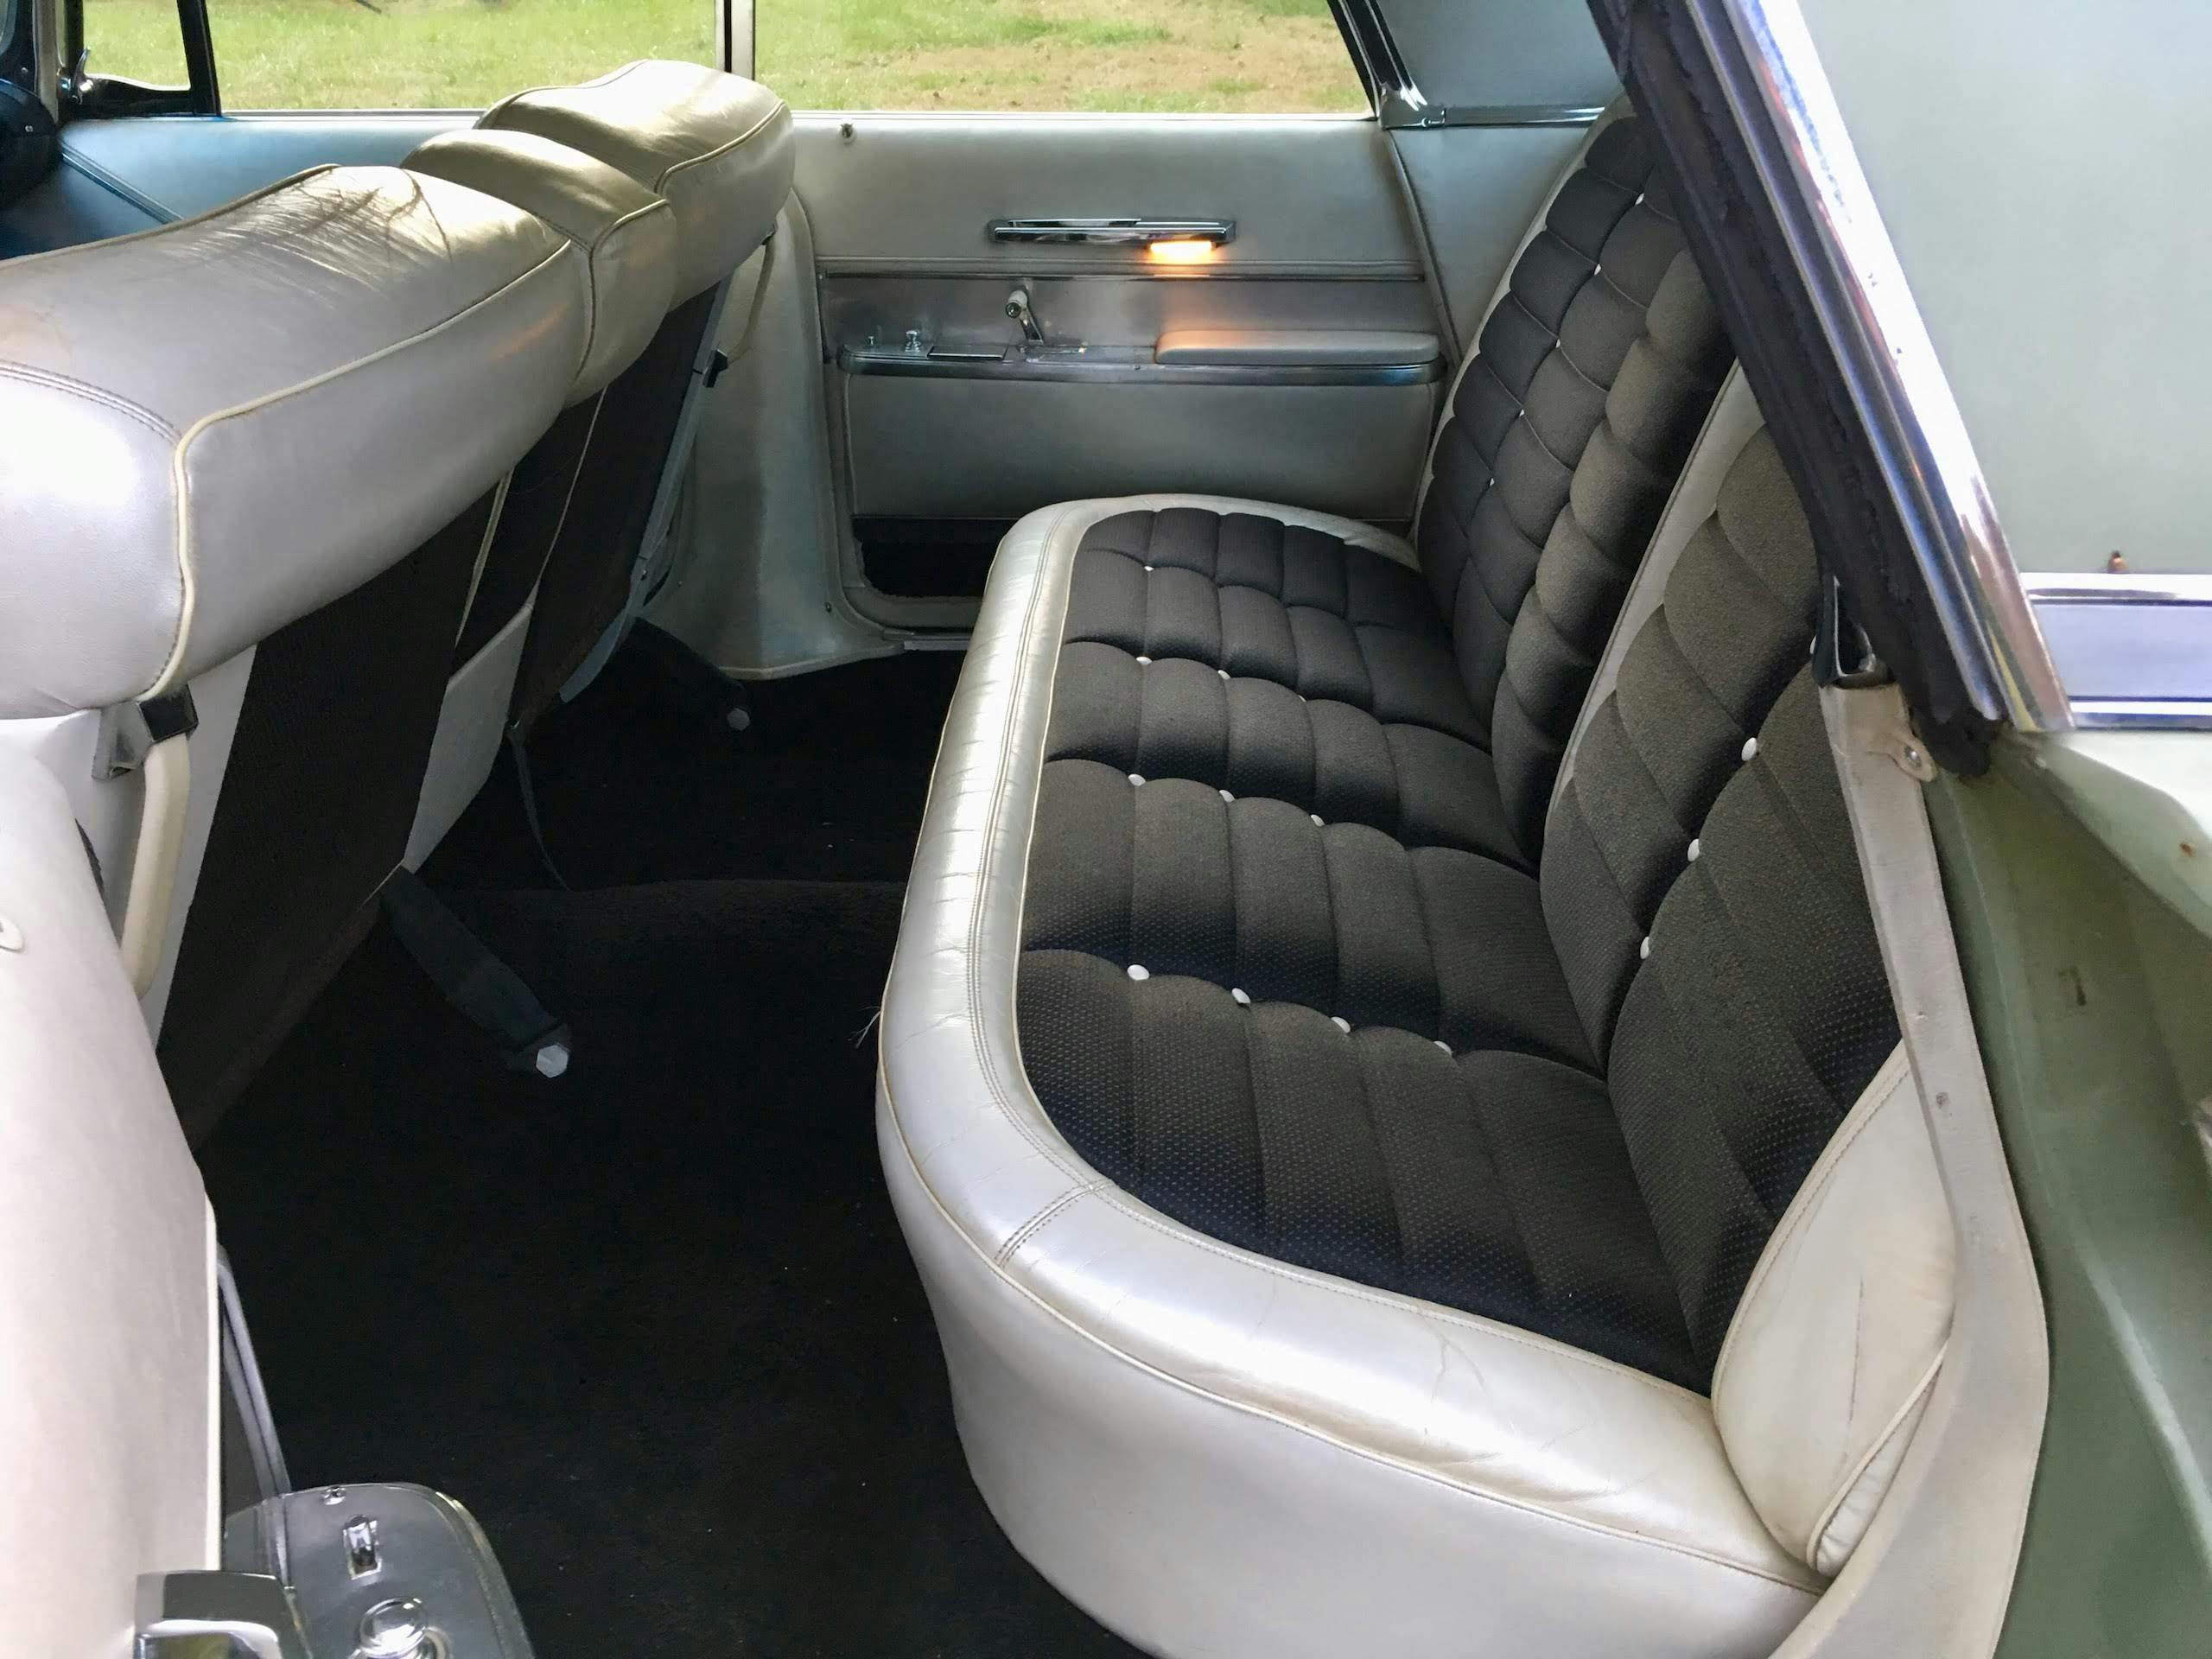 1964 Imperial Crown interior rear seat